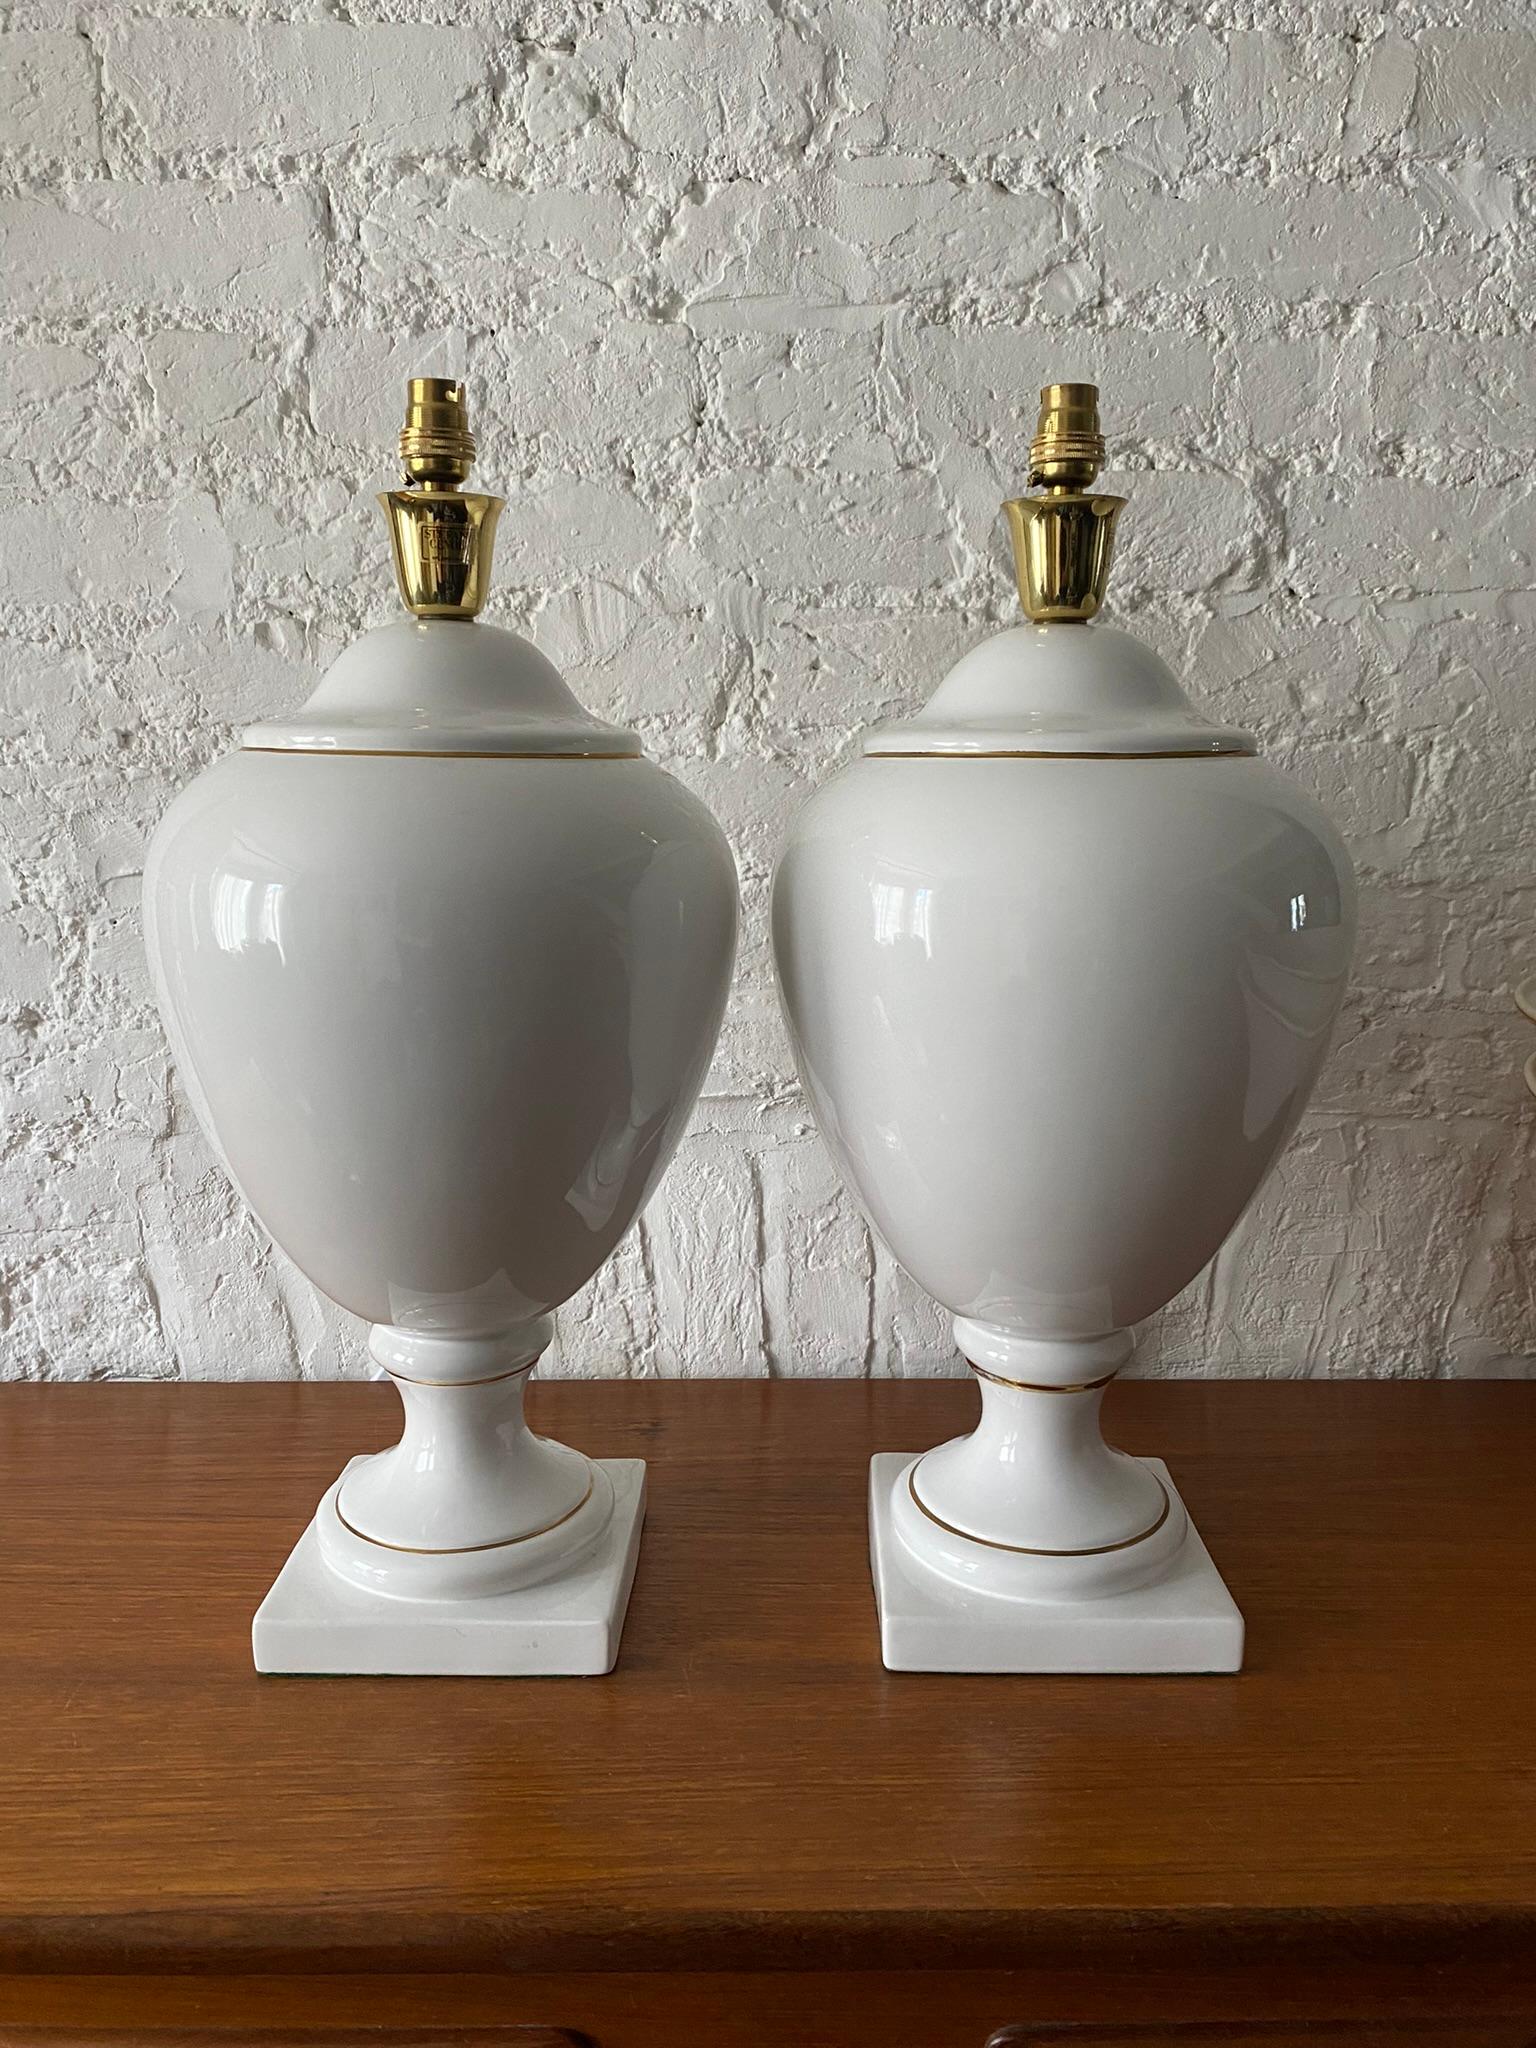 Pair of White & Gold Ceramic Table Lamps & Shades by Stefano Cevoli, 1980s For Sale 2